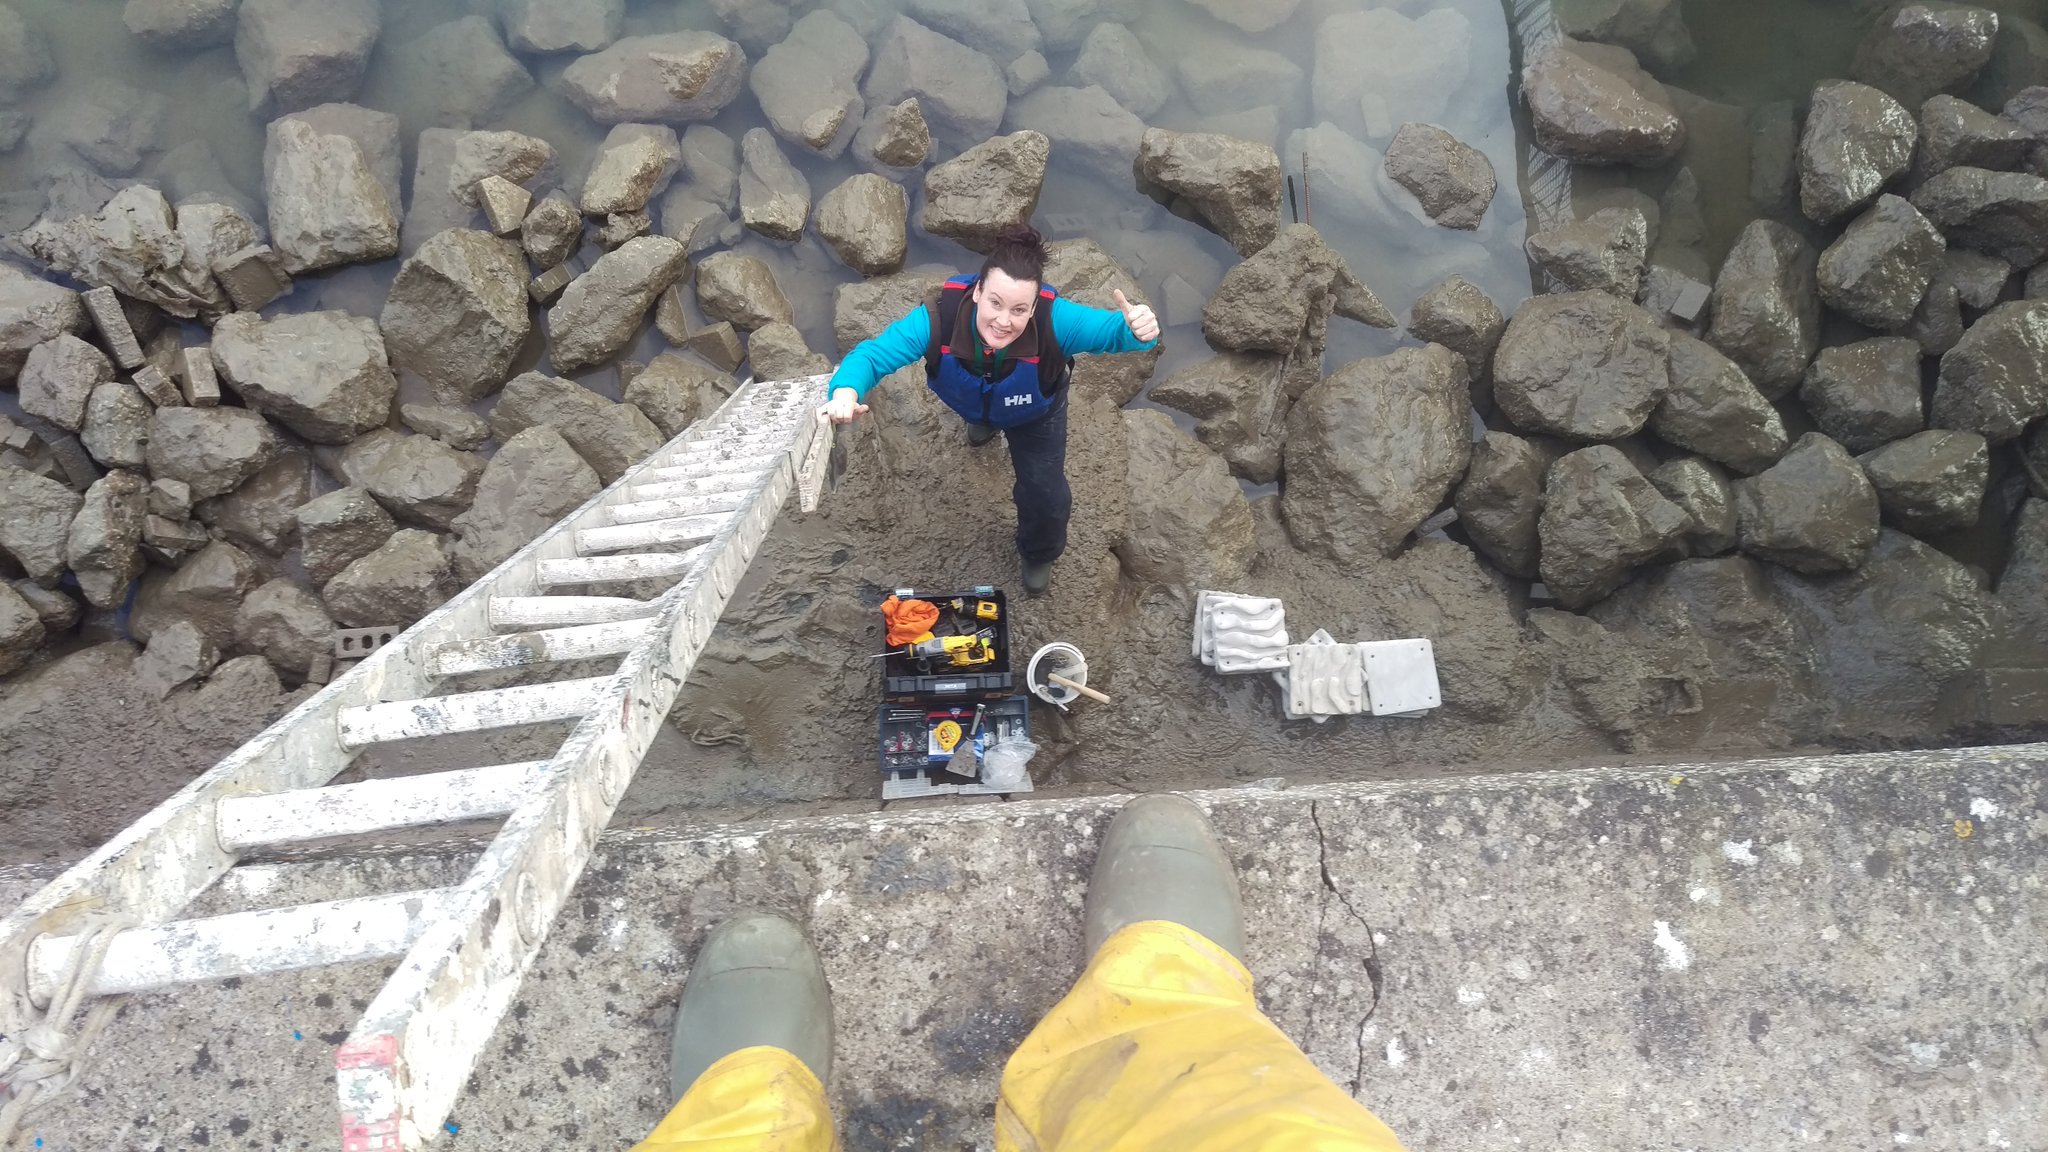 Jen Coughlan of University College Dublin smiles during installation of an eco-engineered World Harbour Tile in Ireland.